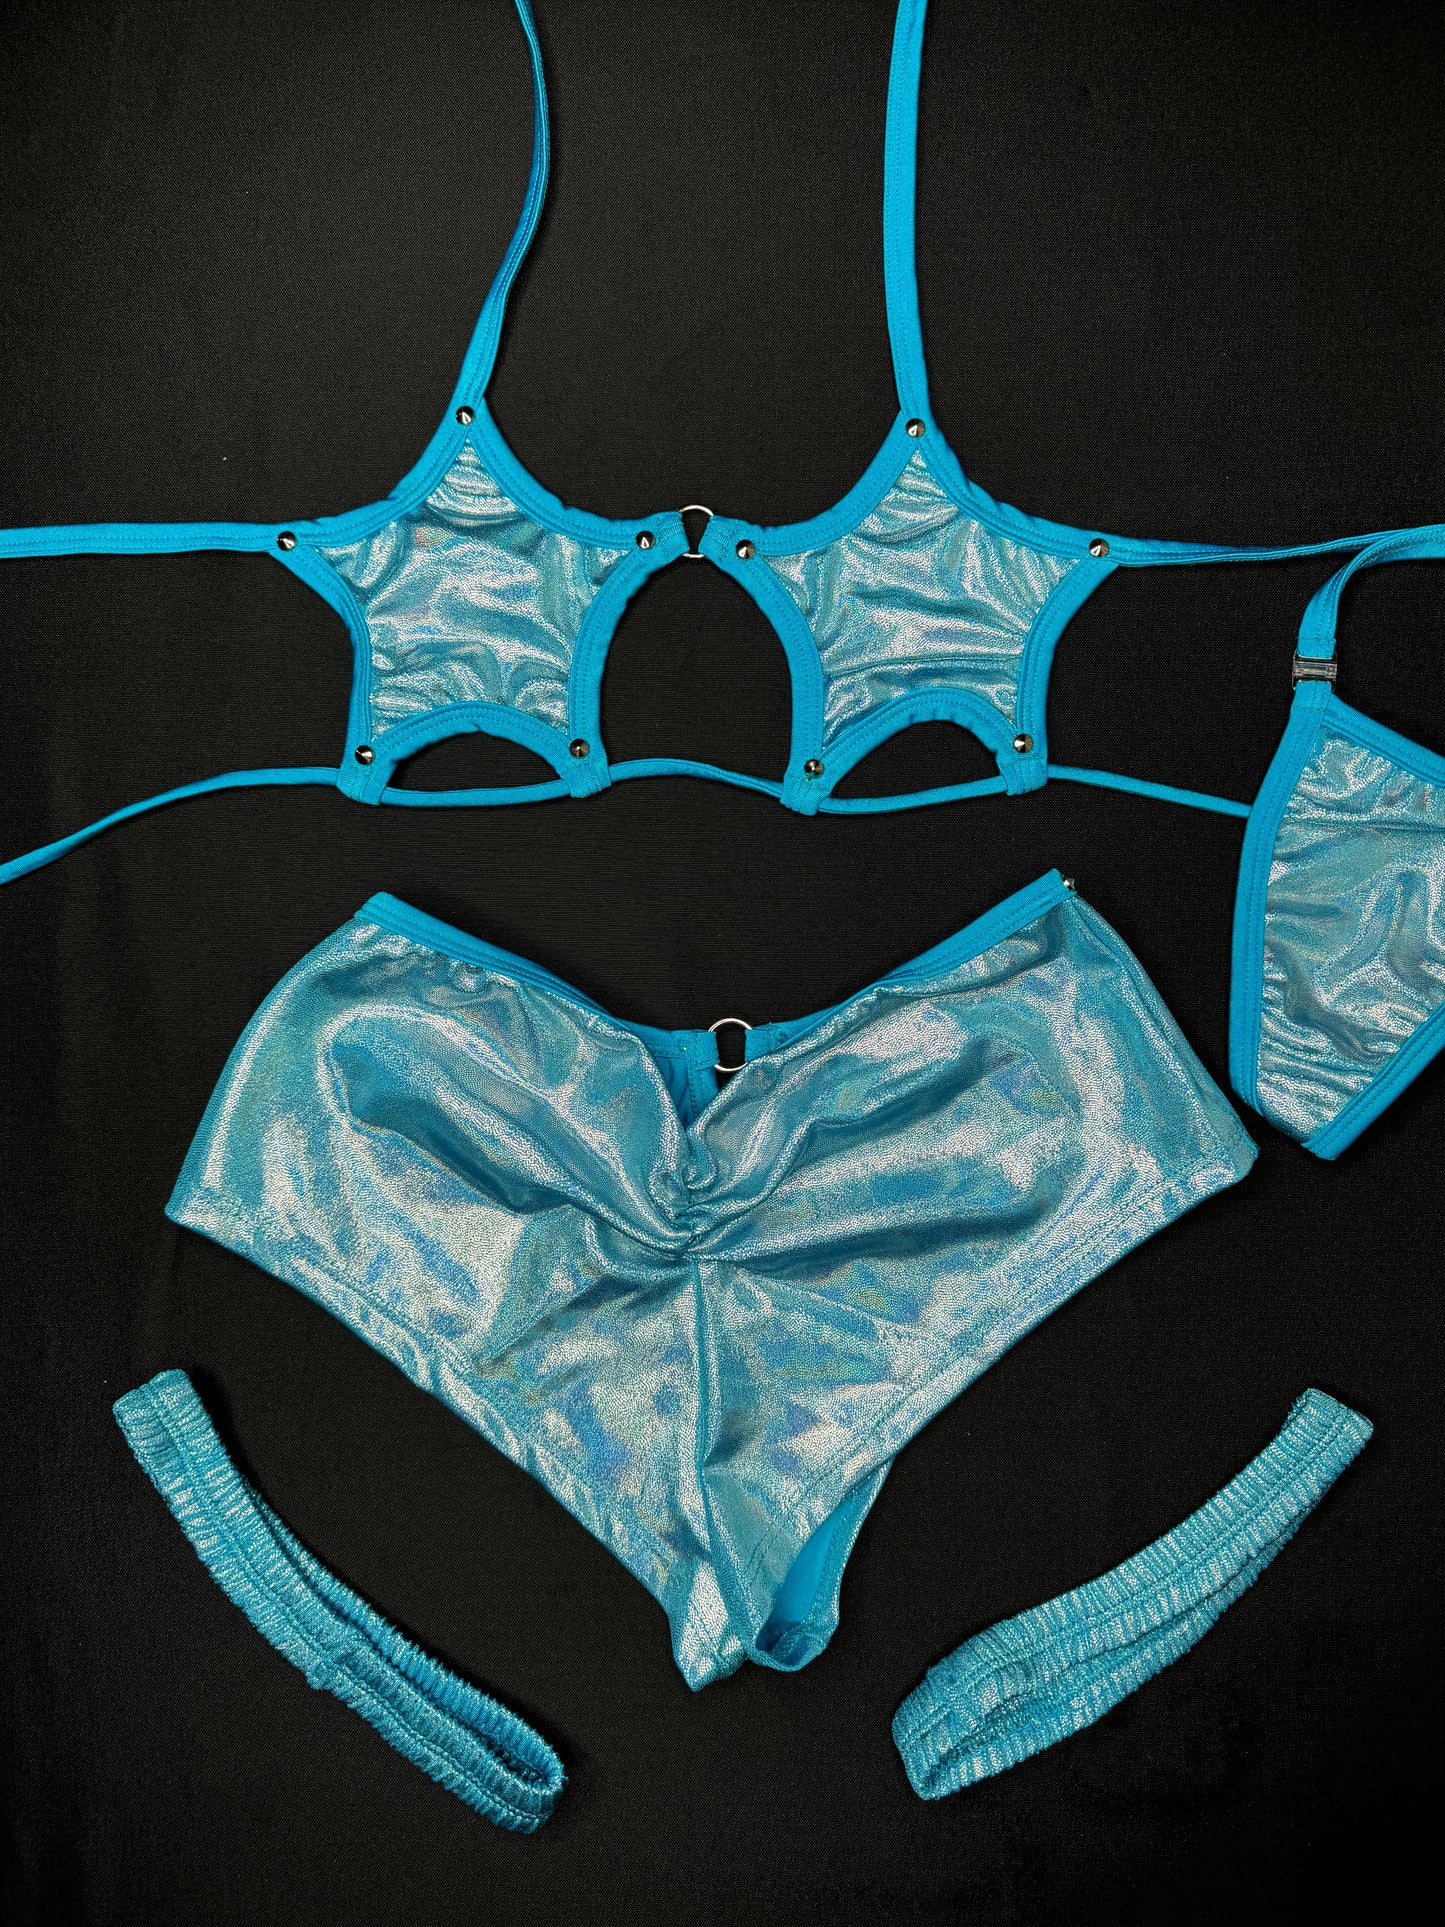 Mystic Blue Two-Piece Shorts with Garters Lingerie Outfit